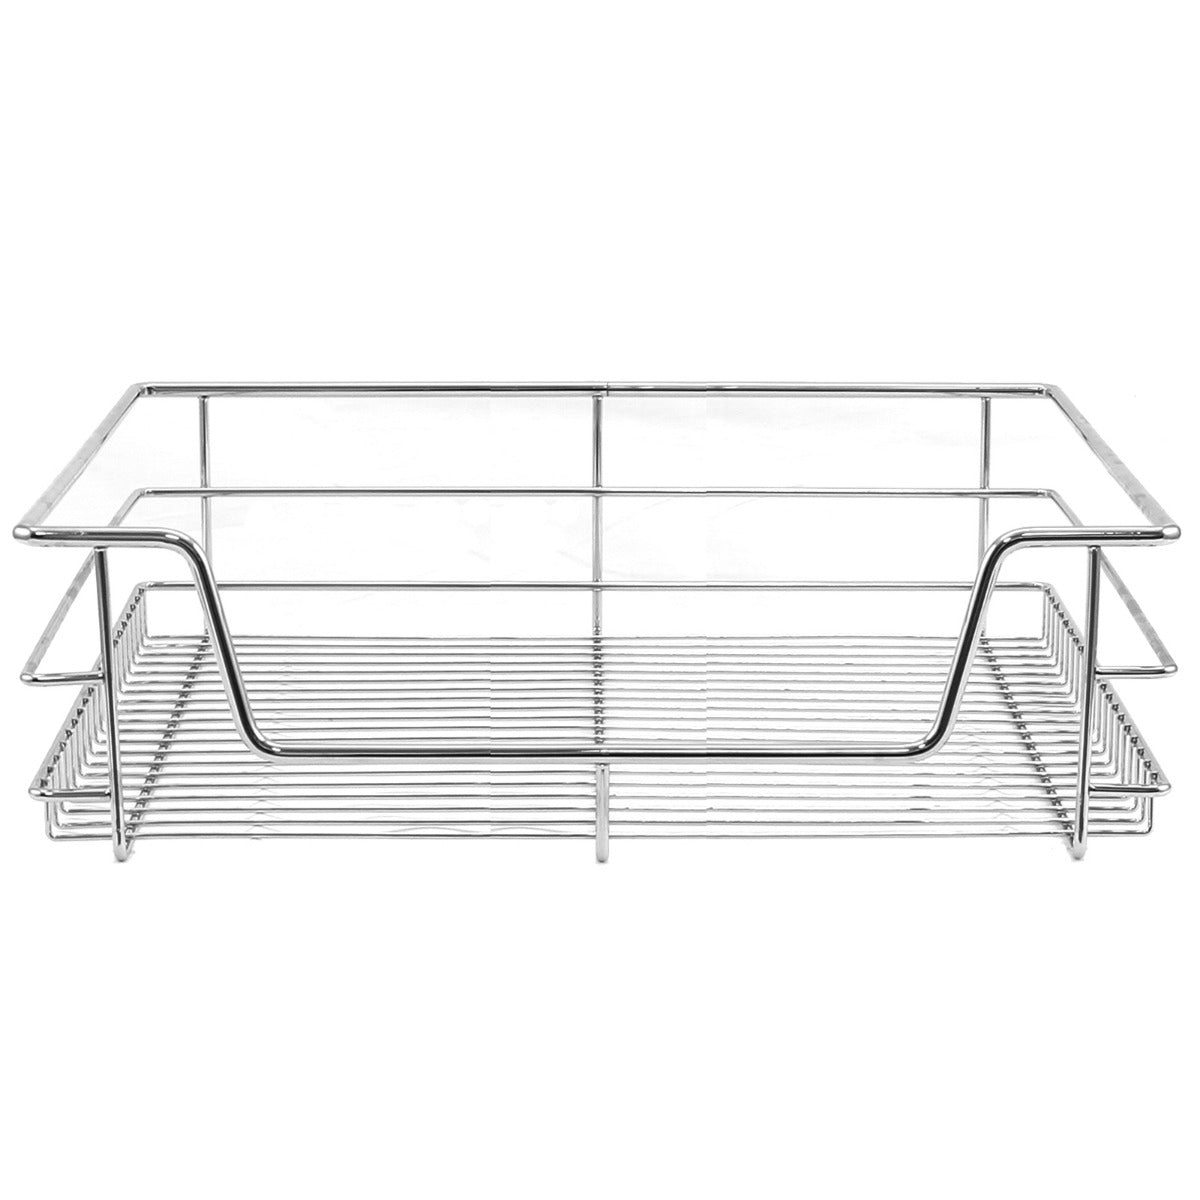 5 x KuKoo Kitchen Pull Out Storage Baskets – 600mm Wide Cabinet